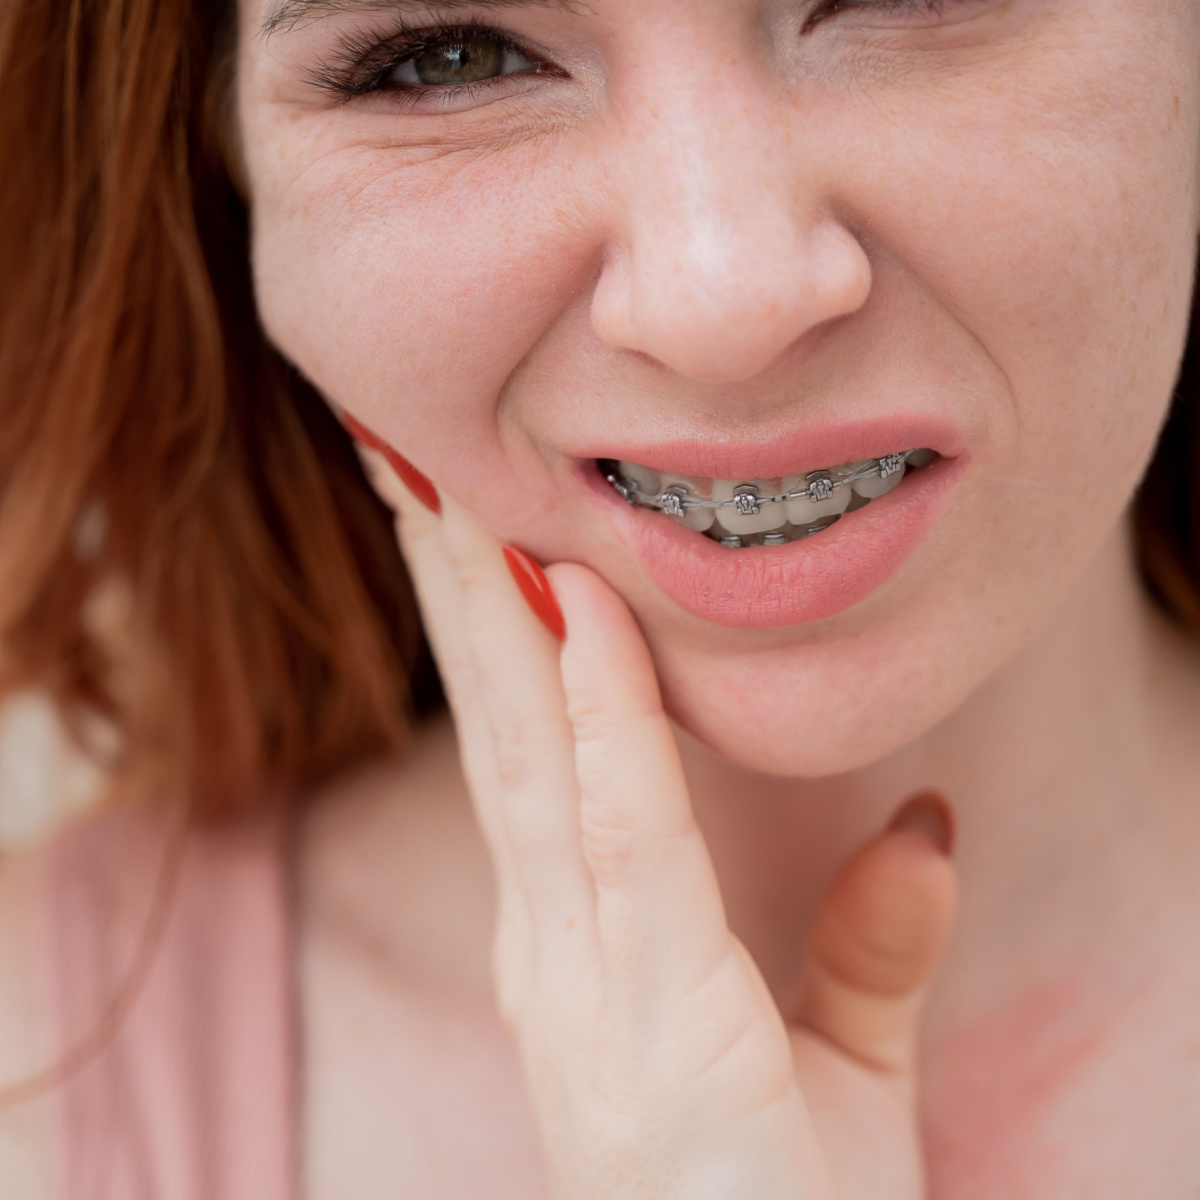 Woman complains of discomfort coming from her dental braces.